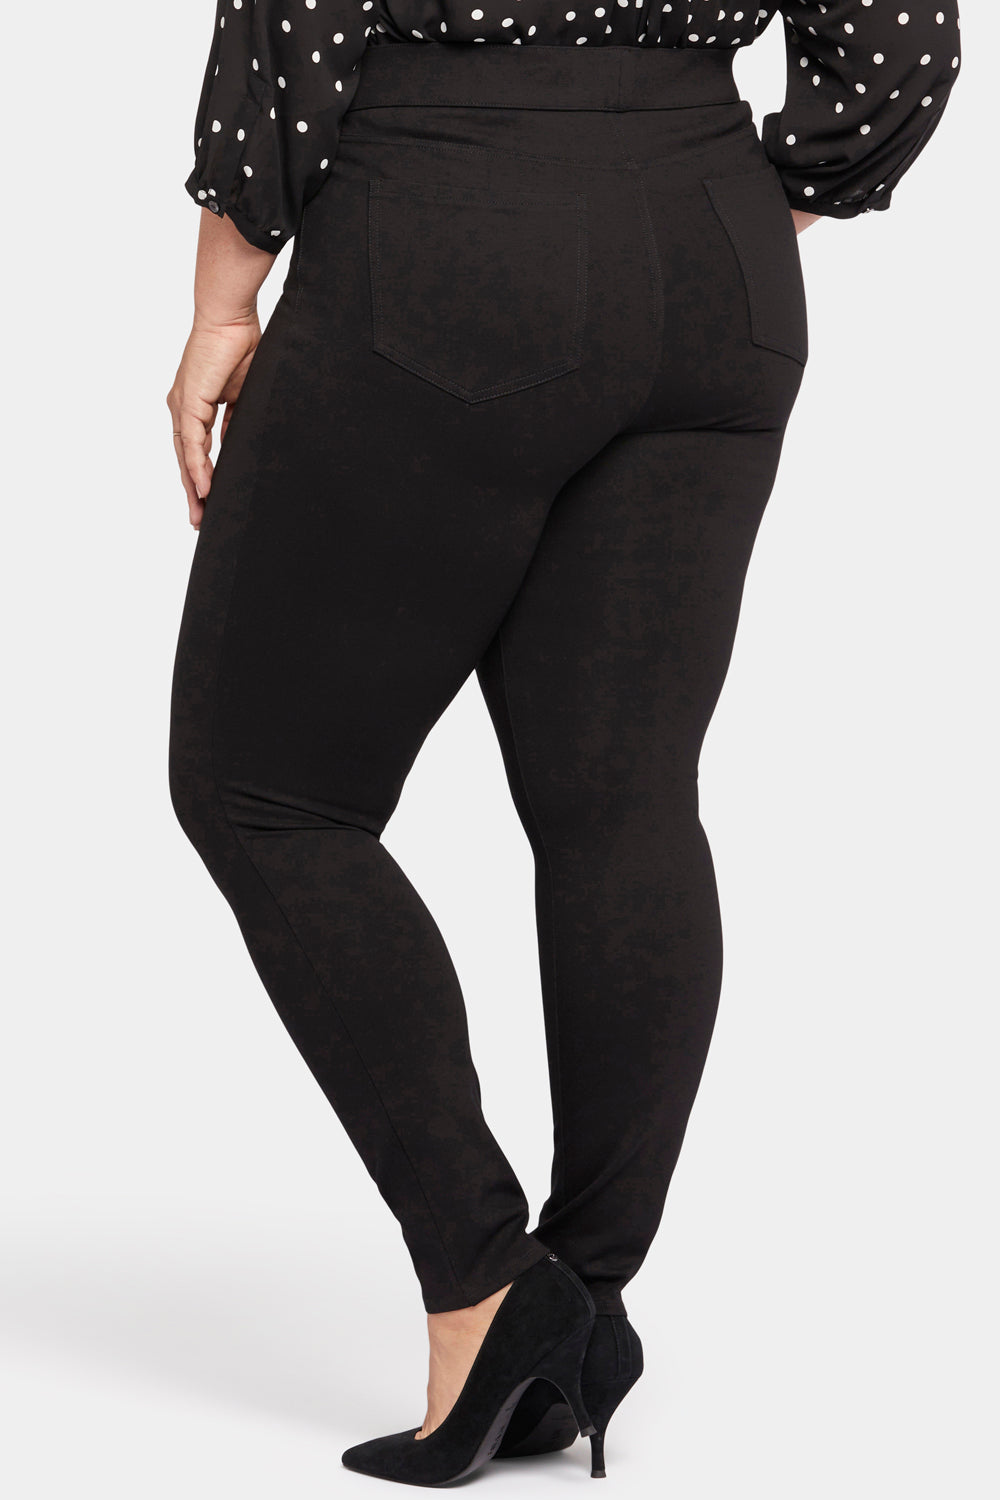 Modern Legging Pants In Plus Size Sculpt-Her™ Collection - Black